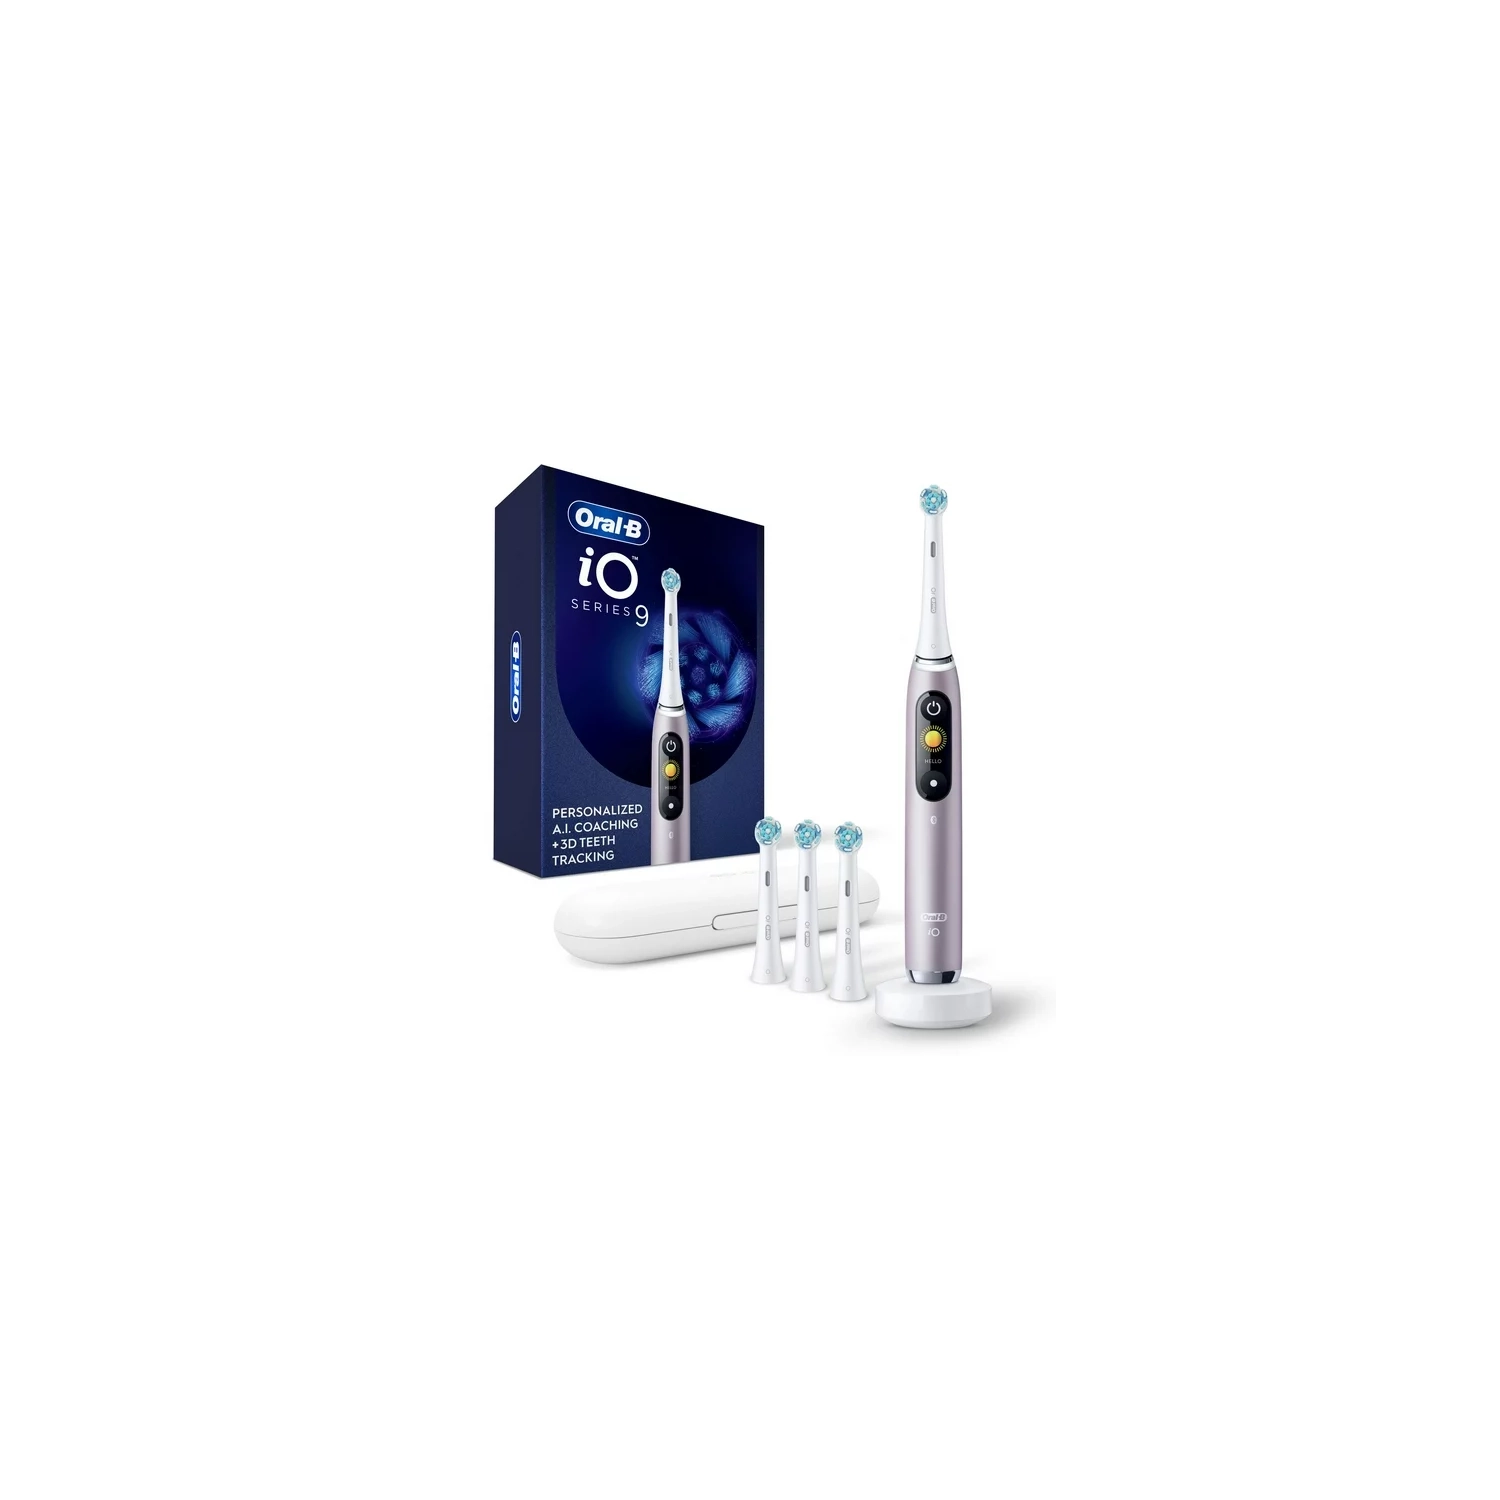 Oral-B iO Series 9 Electric Toothbrush with 4 Brush Heads, iO9 Rechargeable Power Toothbrush - Open Box